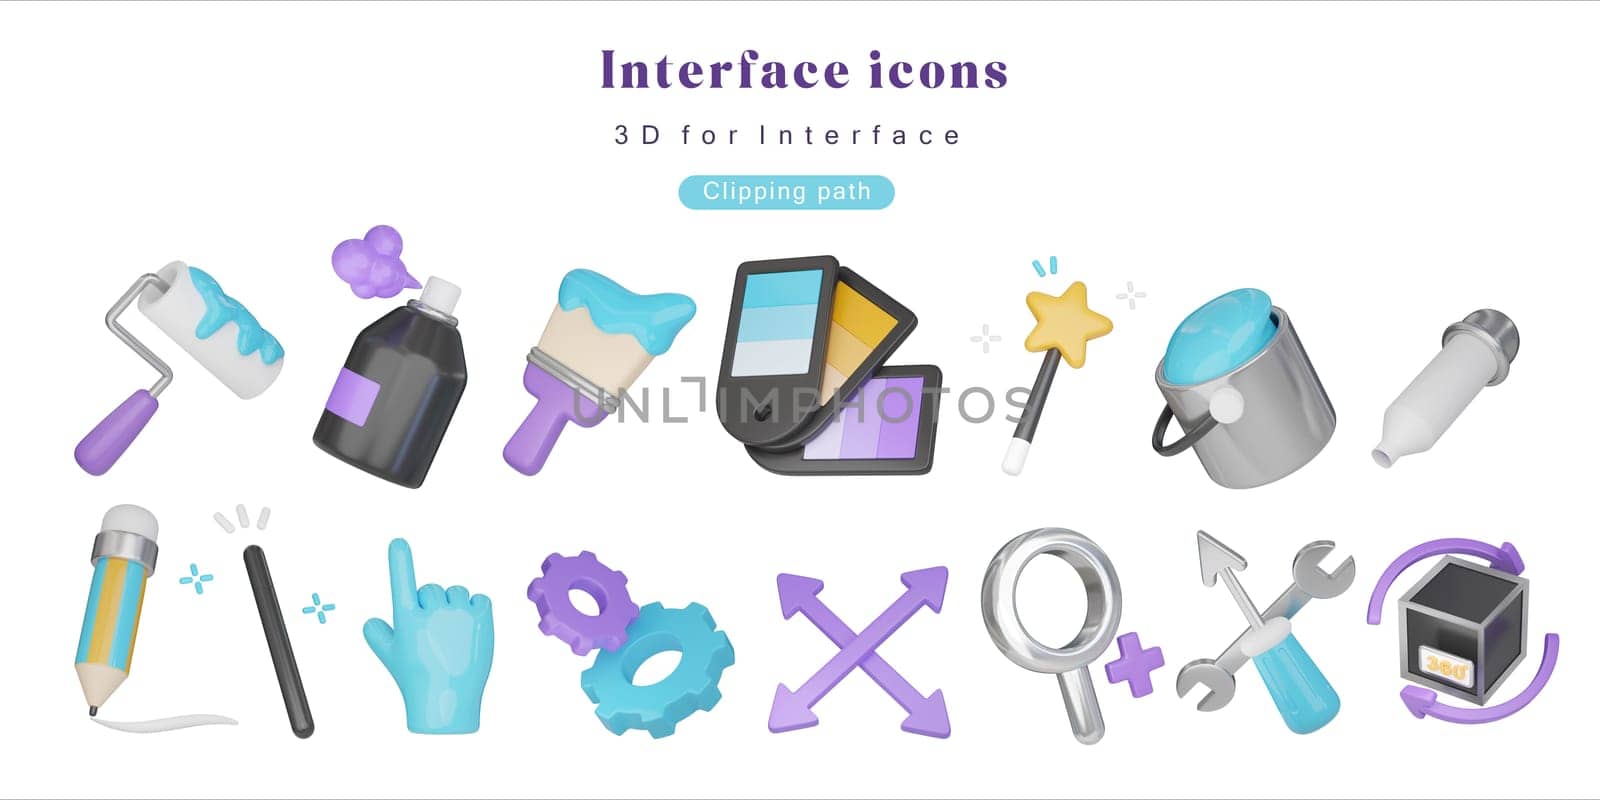 Collection of 3D icons for interface design, including buttons, cursors, and design elements, perfect for digital applications. by meepiangraphic